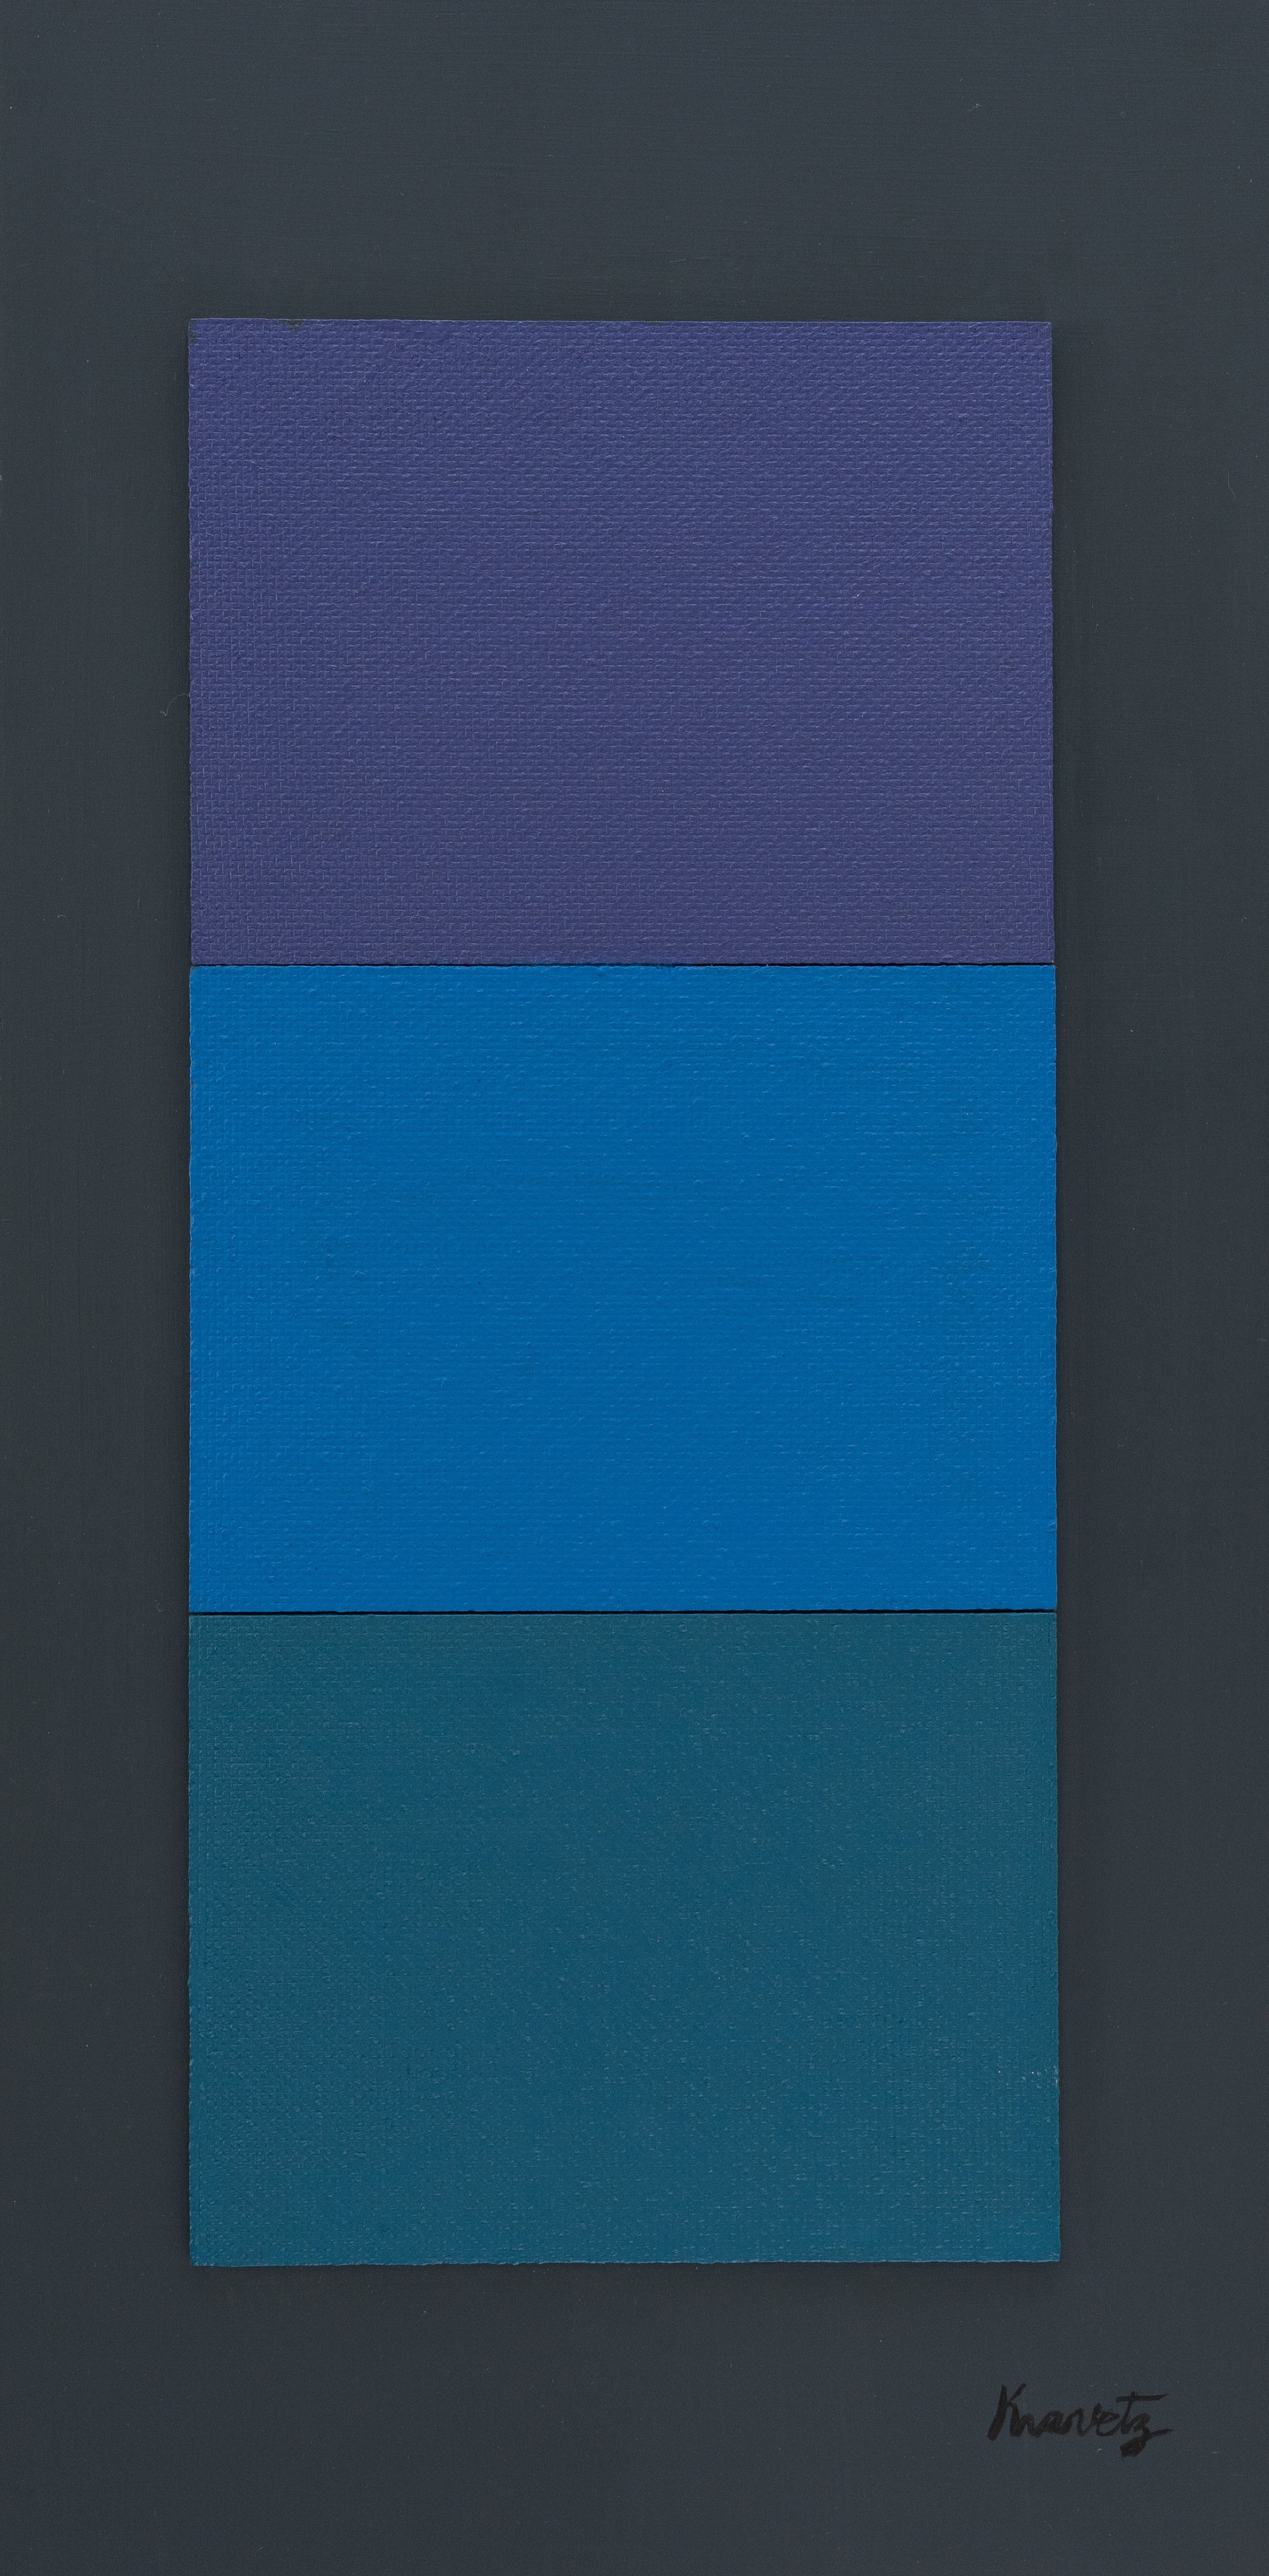 Green, Blue and Purple on Grey, 1974, acrylic on canvas and masonite, 24x12 inches